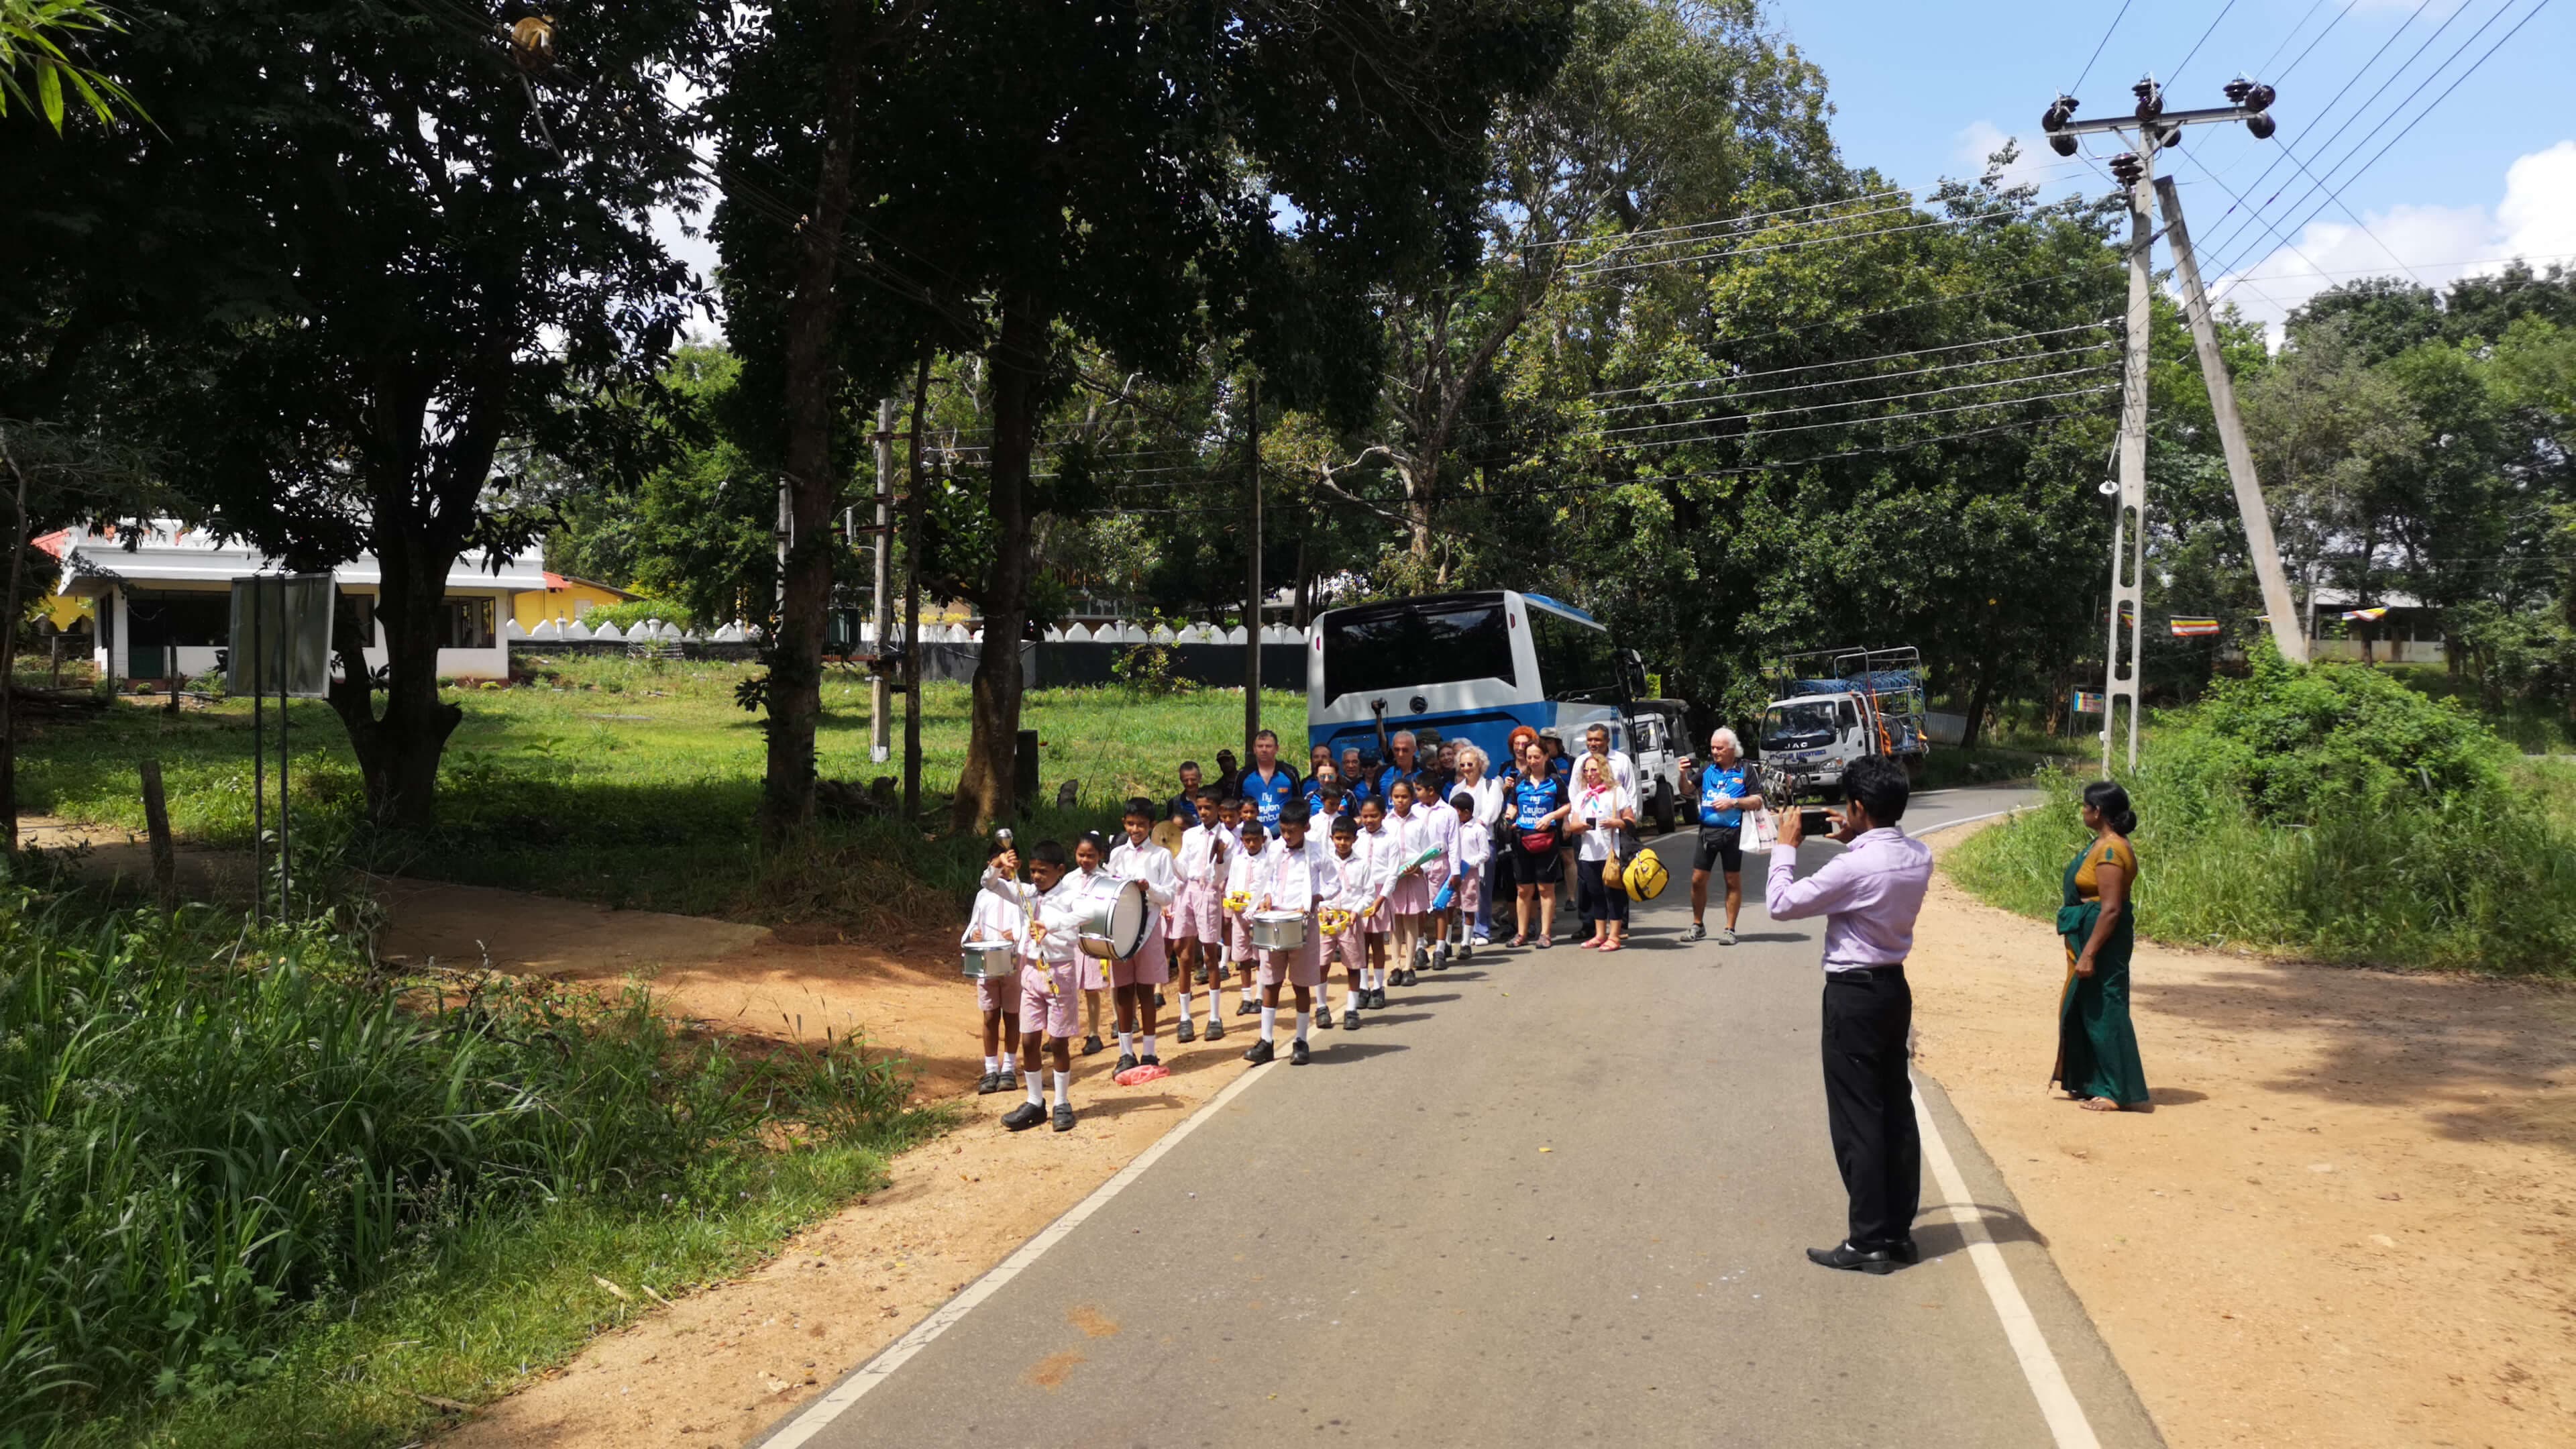 Organizing a marching band event for school kids, Sri Lanka.